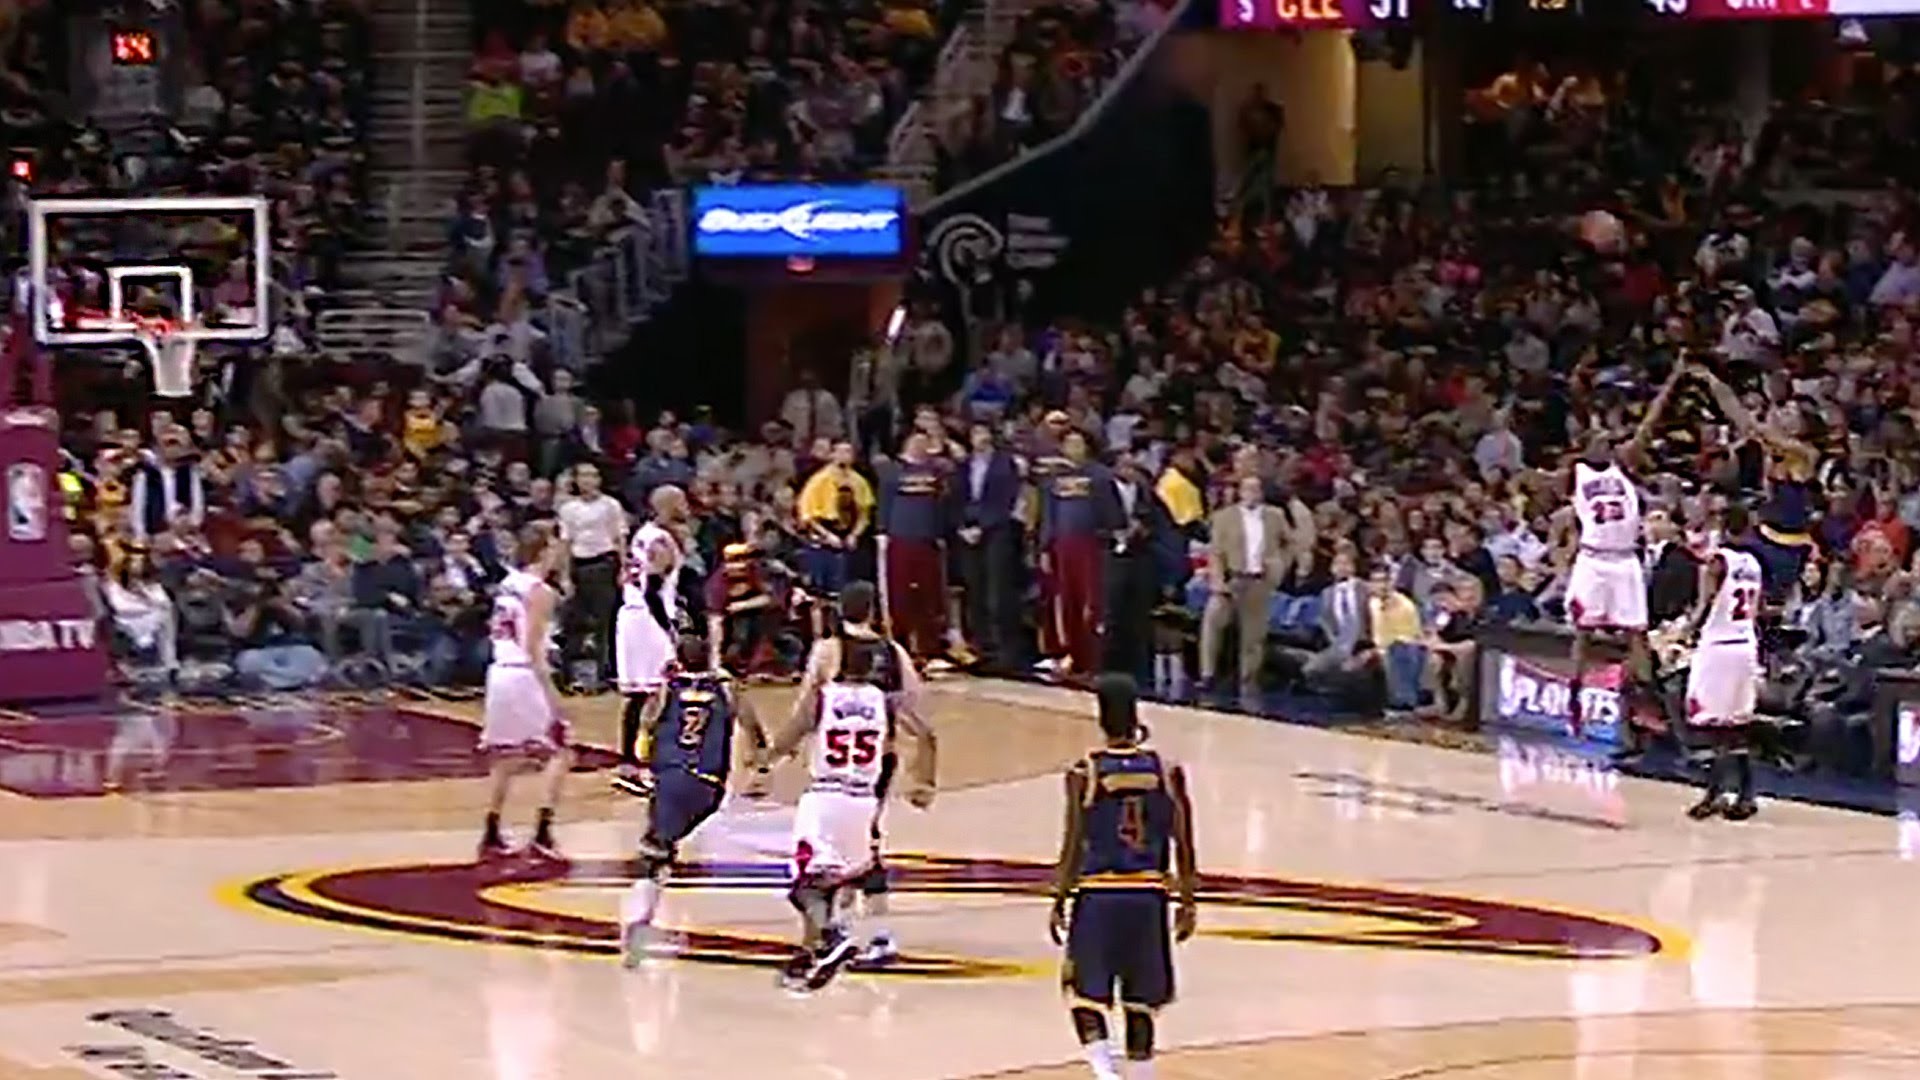 1920x1080 Kyrie Irving & J.R. Smith Hit Crazy Buzzer Beaters in Cavs Win Over Bulls -  YouTube